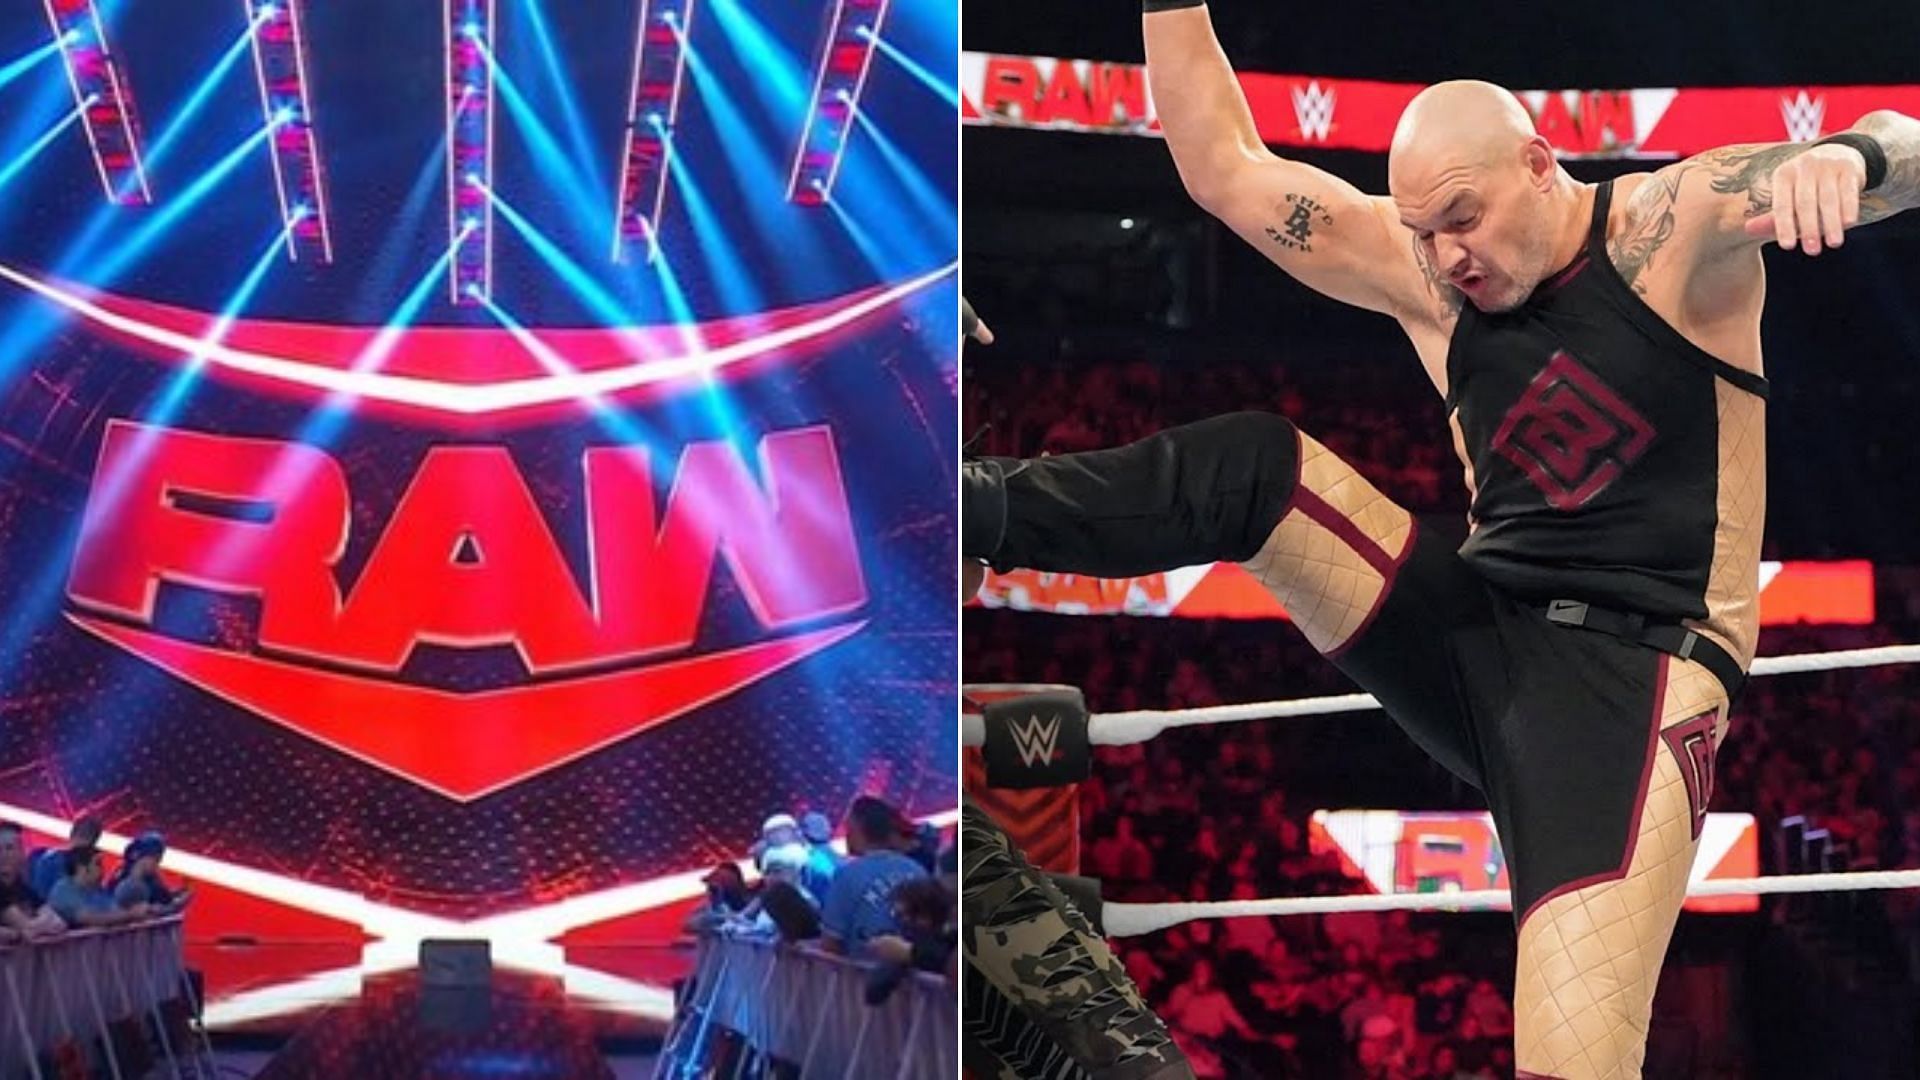 The popular RAW star was recently subjected to a vicious beatdown by Baron Corbin